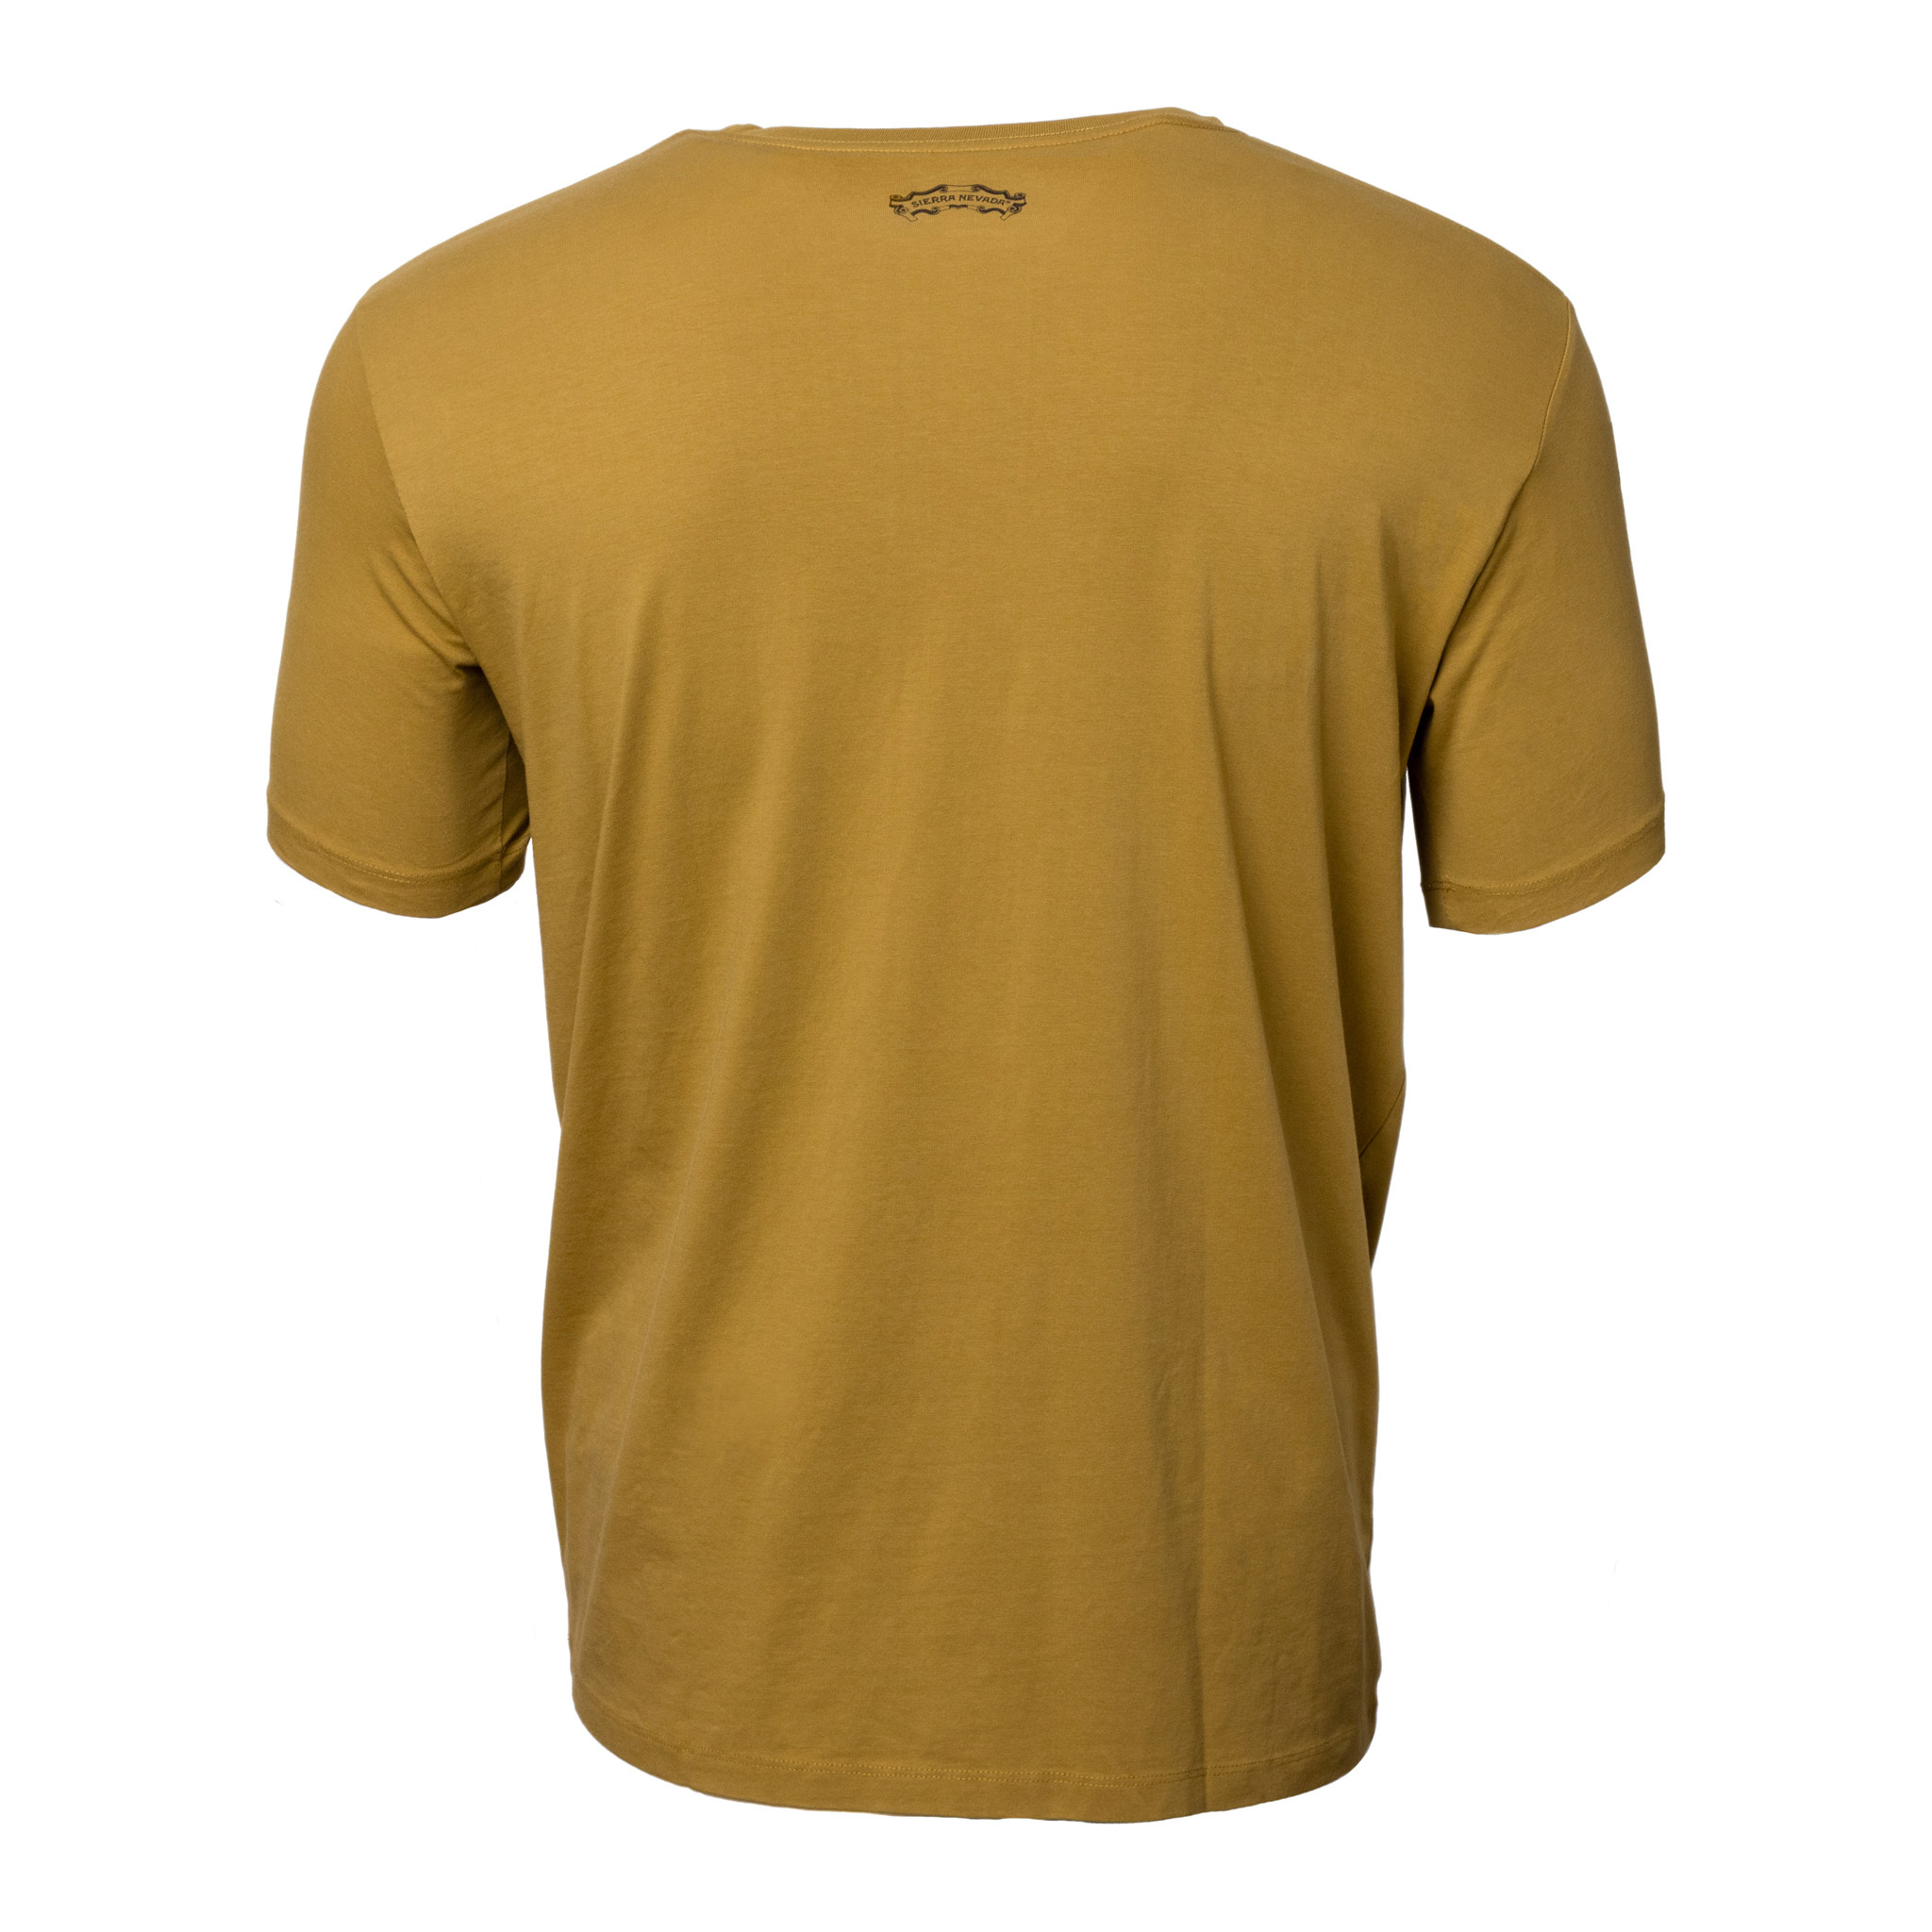 ROVE Mountain Gradient Pocket Tee Gold back view